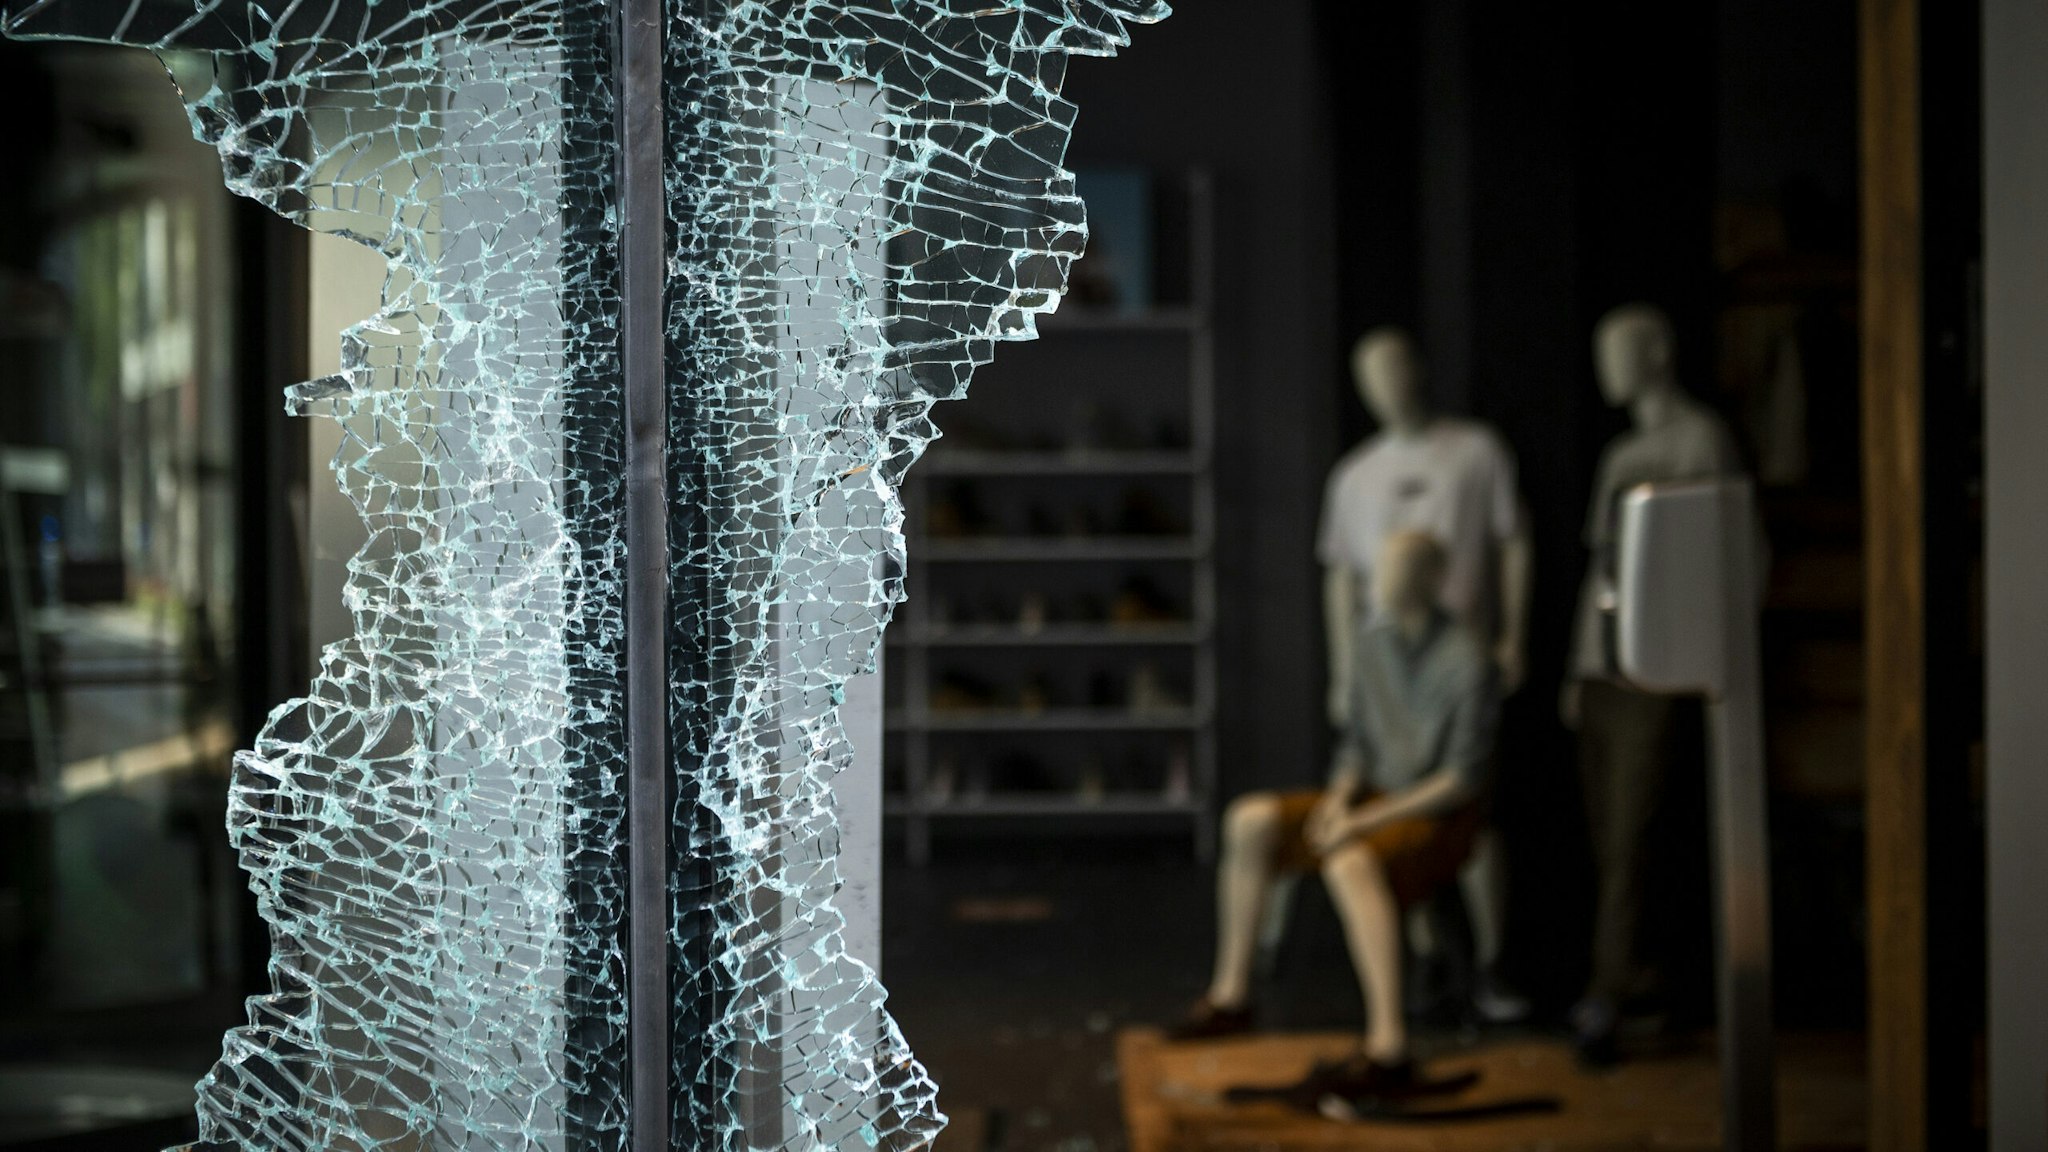 Shattered glass remains on the window frame of a Timberland LLC store following looting on Michigan Avenue in Chicago, Illinois, U.S., on Monday, Aug. 10, 2020. Chicago police arrested more than 100 people for looting, disorderly conduct and battery against officers, among other charges, as crowds of people descended upon the city's downtown overnight, Superintendent David Brown said during a press conference Monday. Photographer: Christopher Dilts/Bloomberg via Getty Images